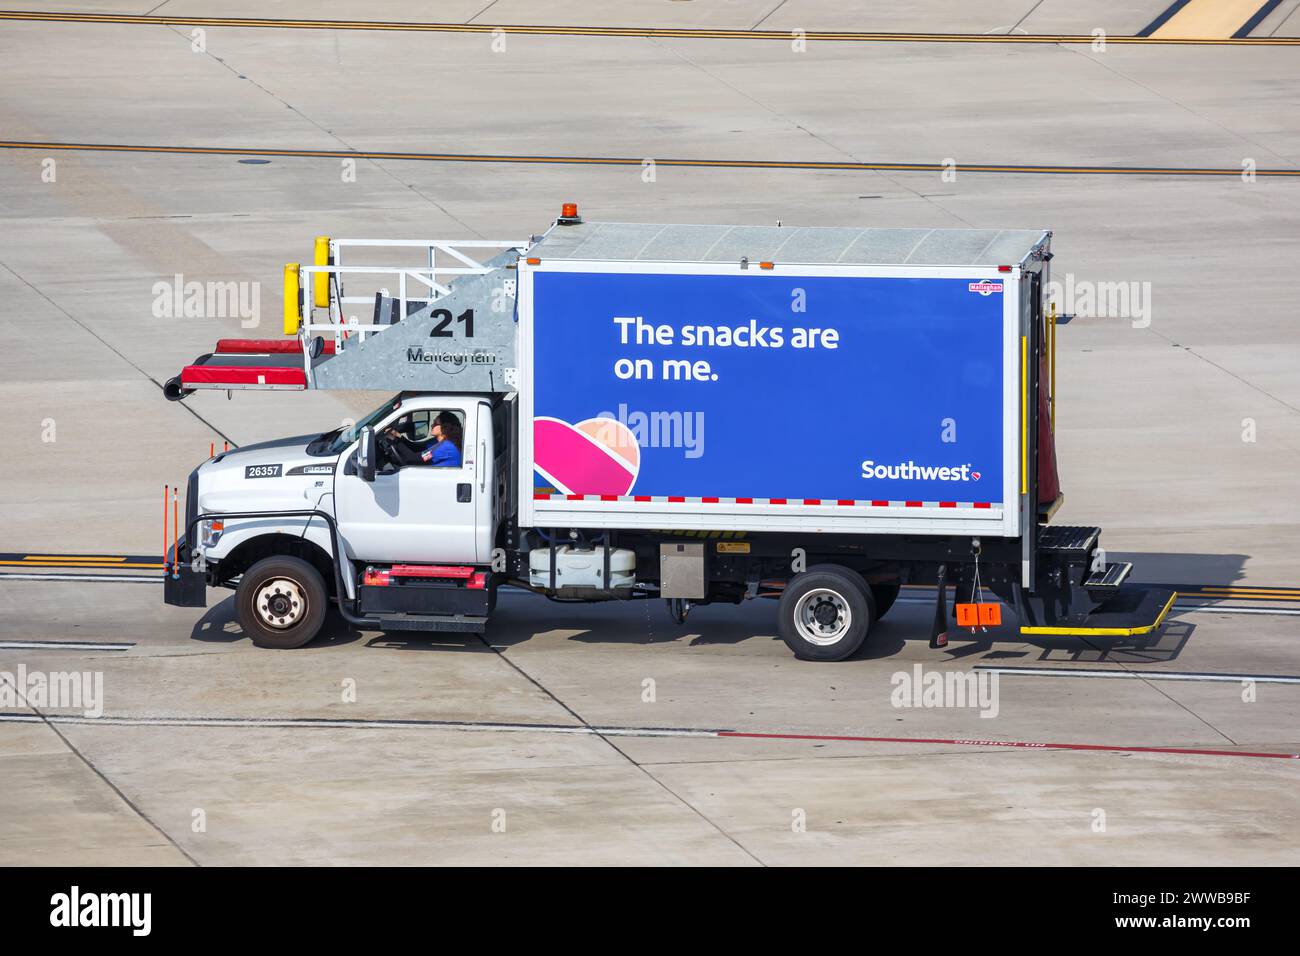 Dallas, United States - November 7, 2022: Southwest catering truck with snacks at Dallas Love Field Airport (DAL) in the United States. Stock Photo